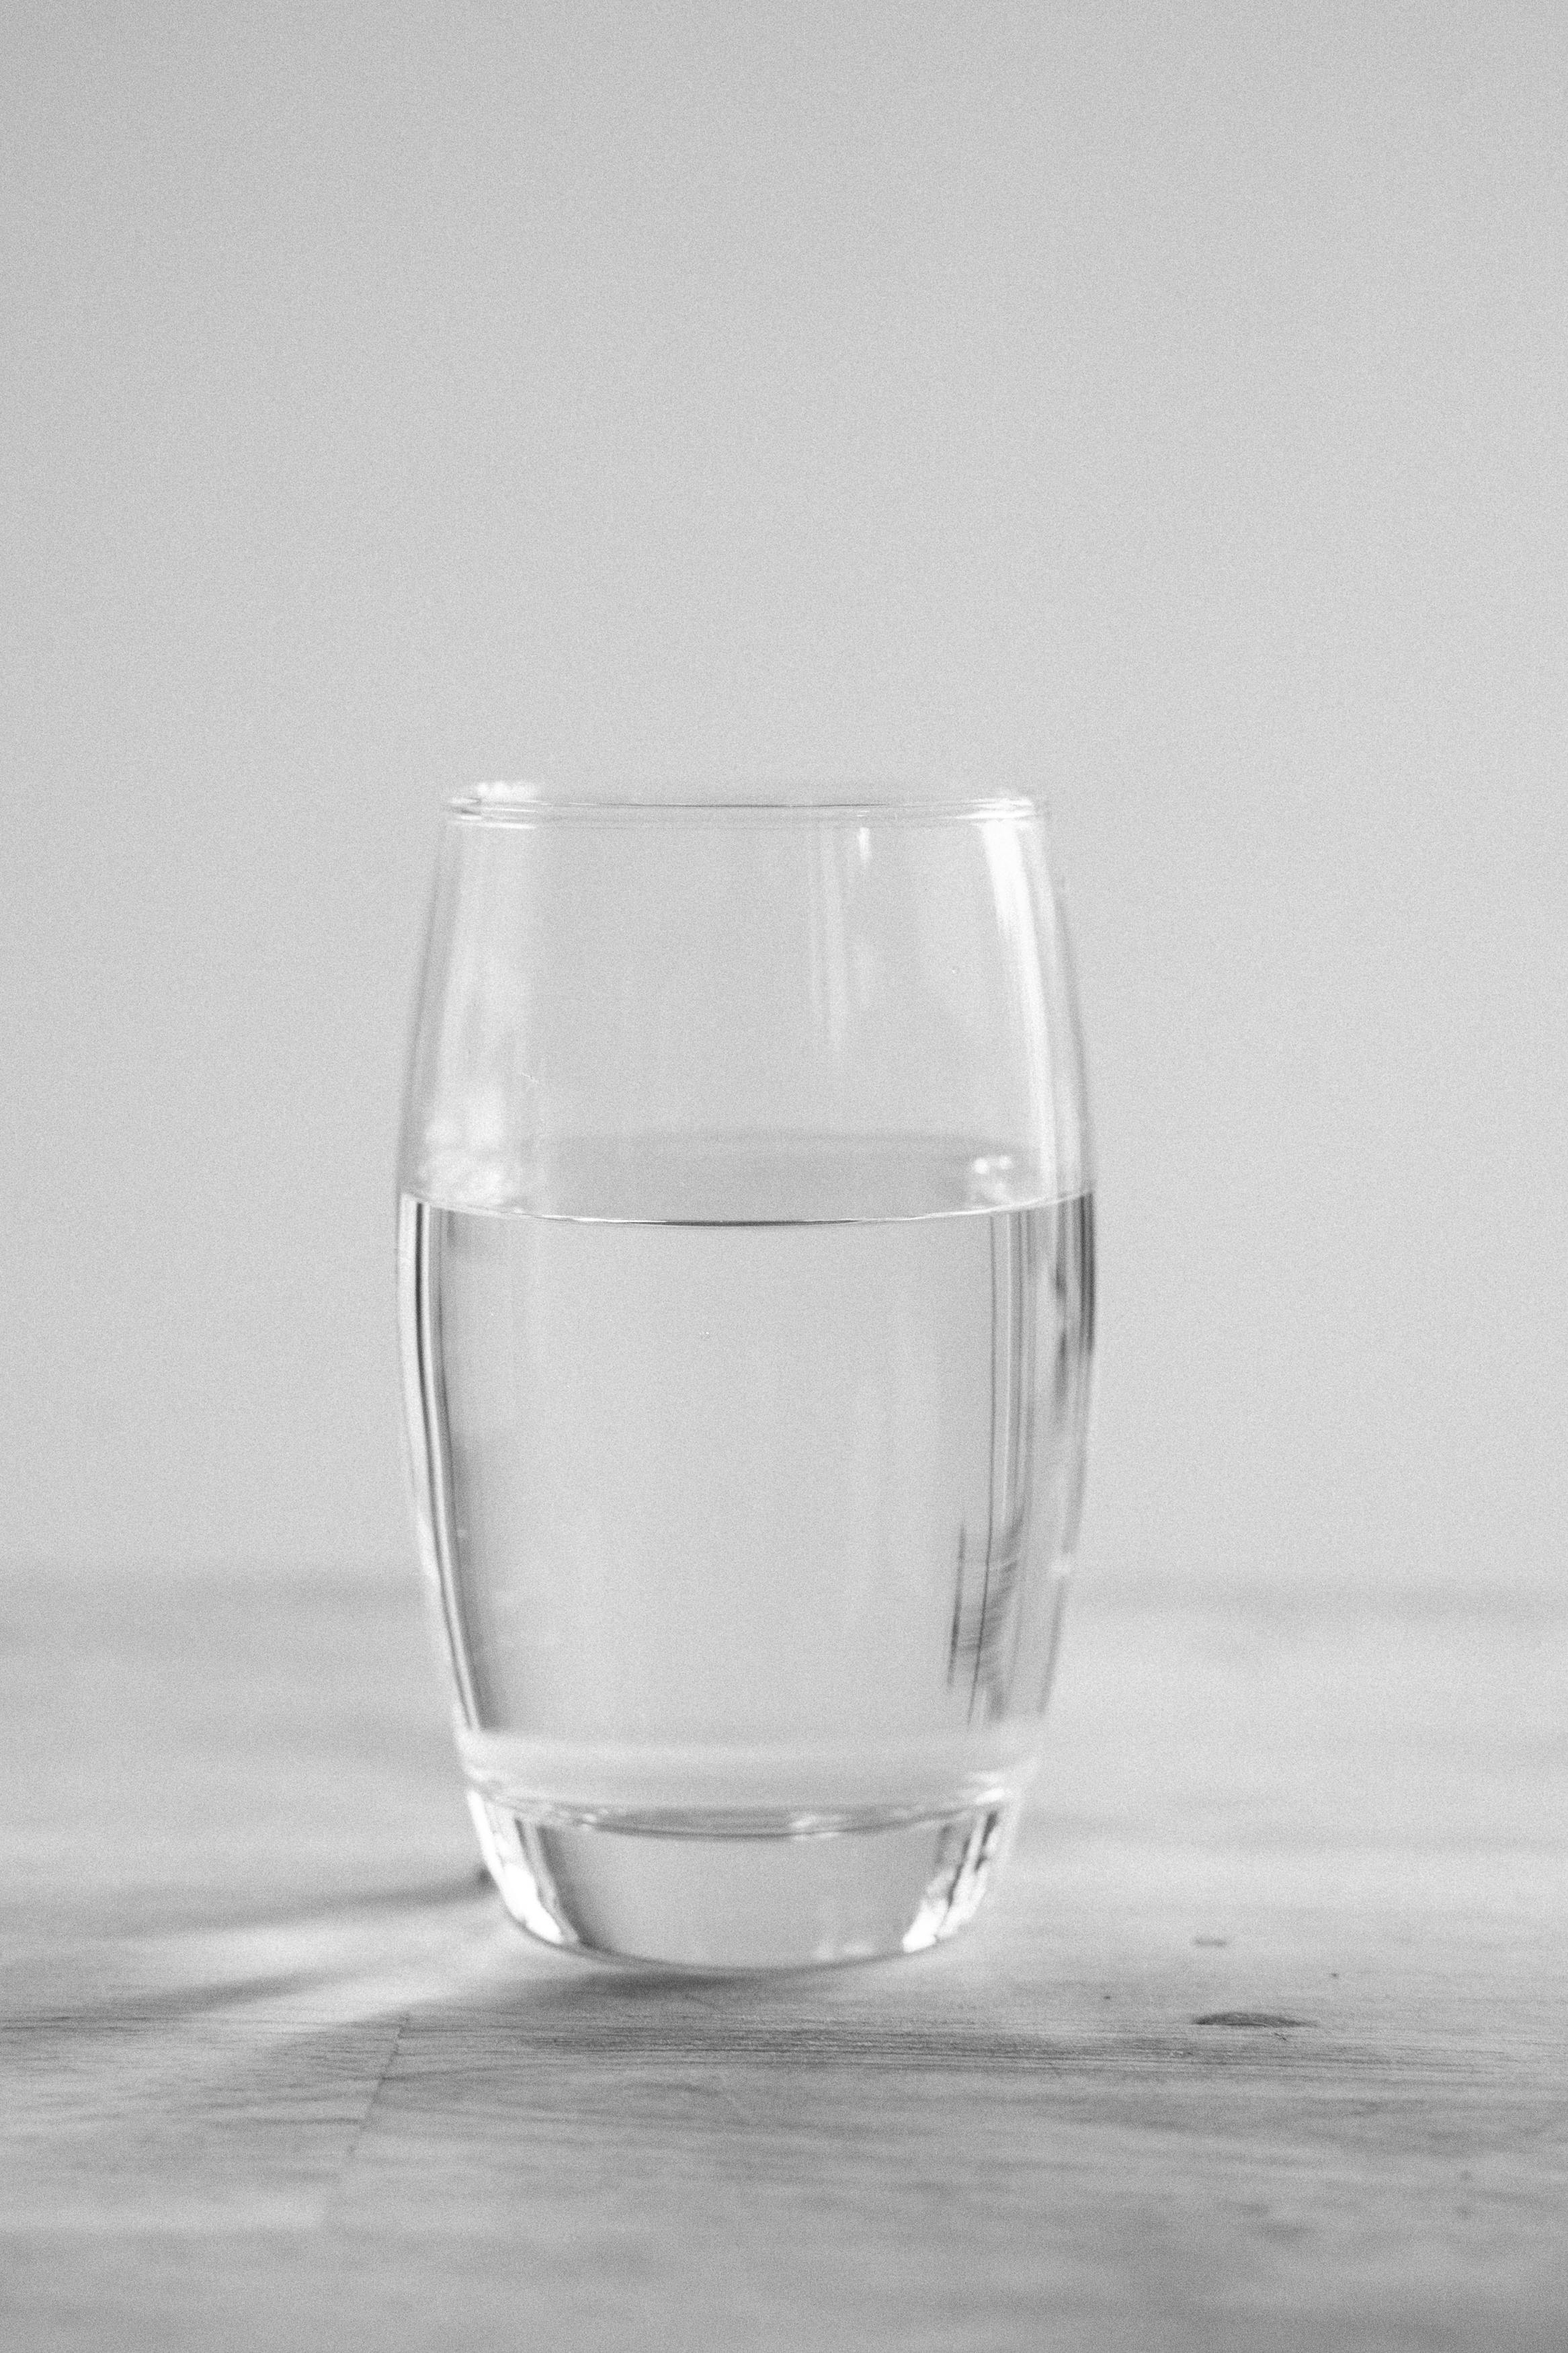 Royalty-Free photo: Clear drinking glass with body of water